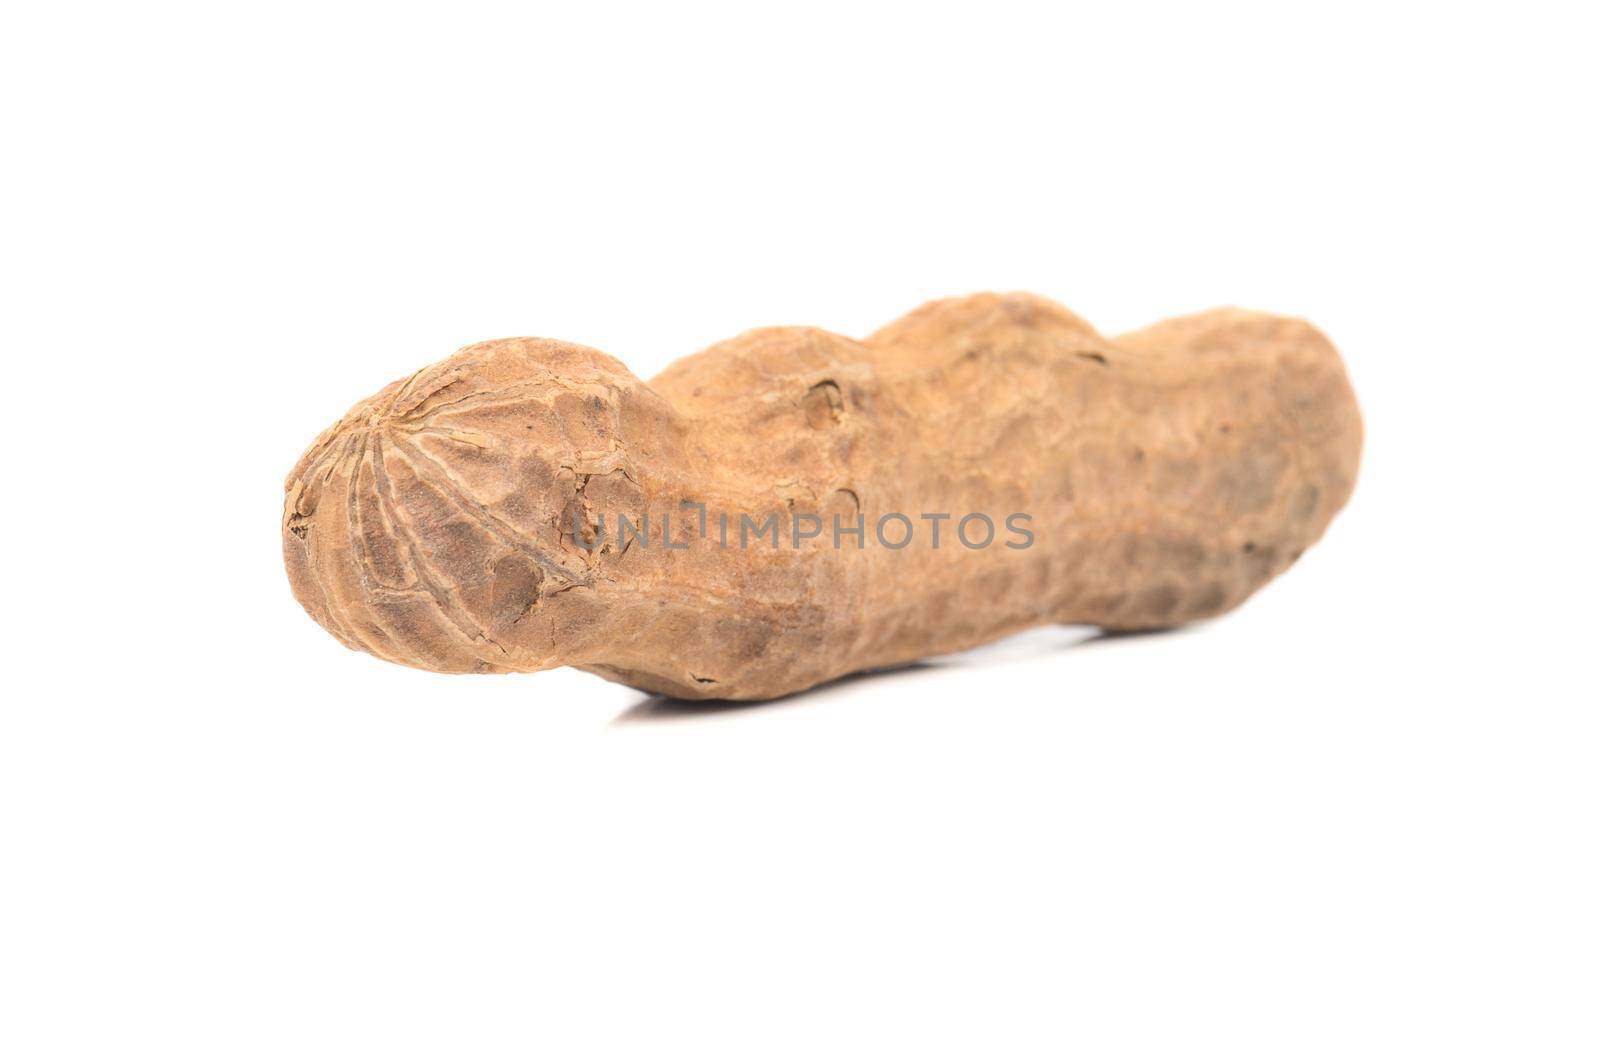 Peanuts in shell isolated on white background